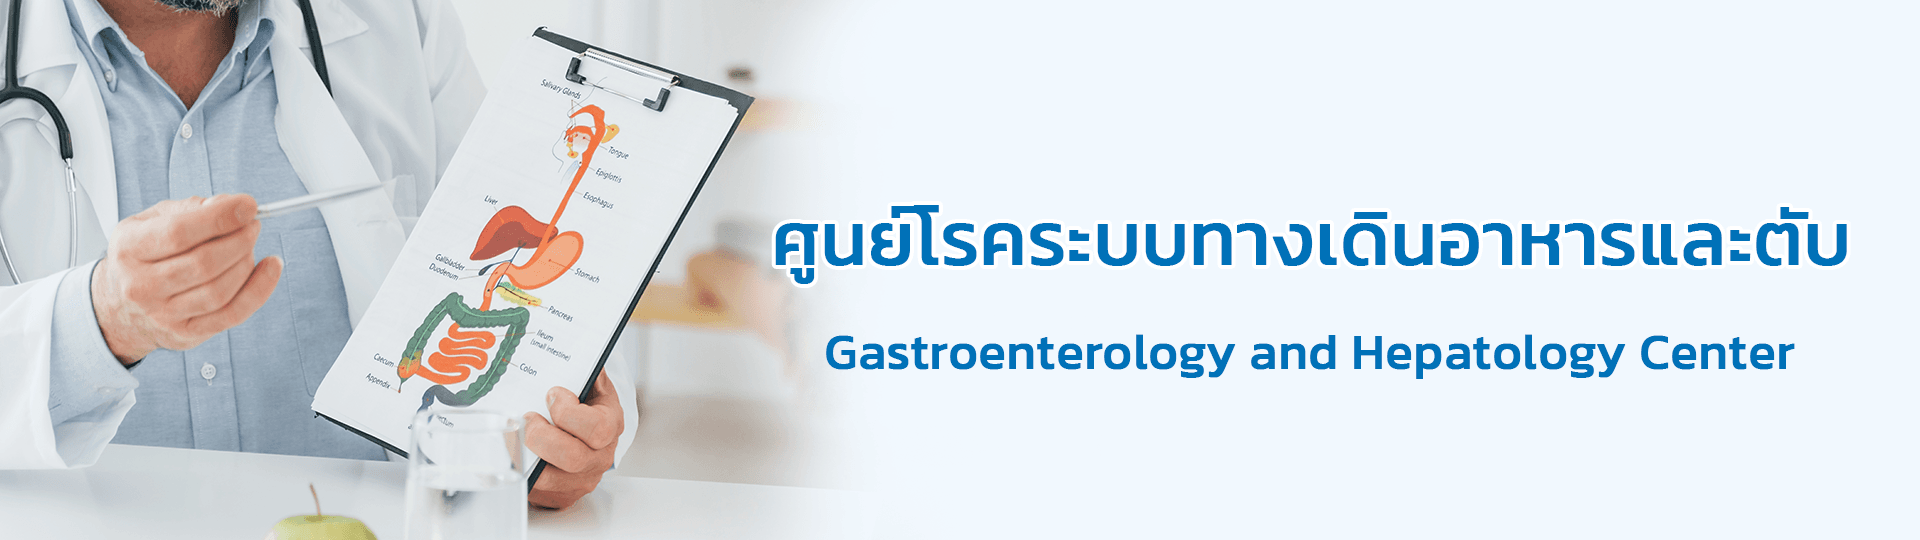 Gastroenterology and Hepatology Center.png